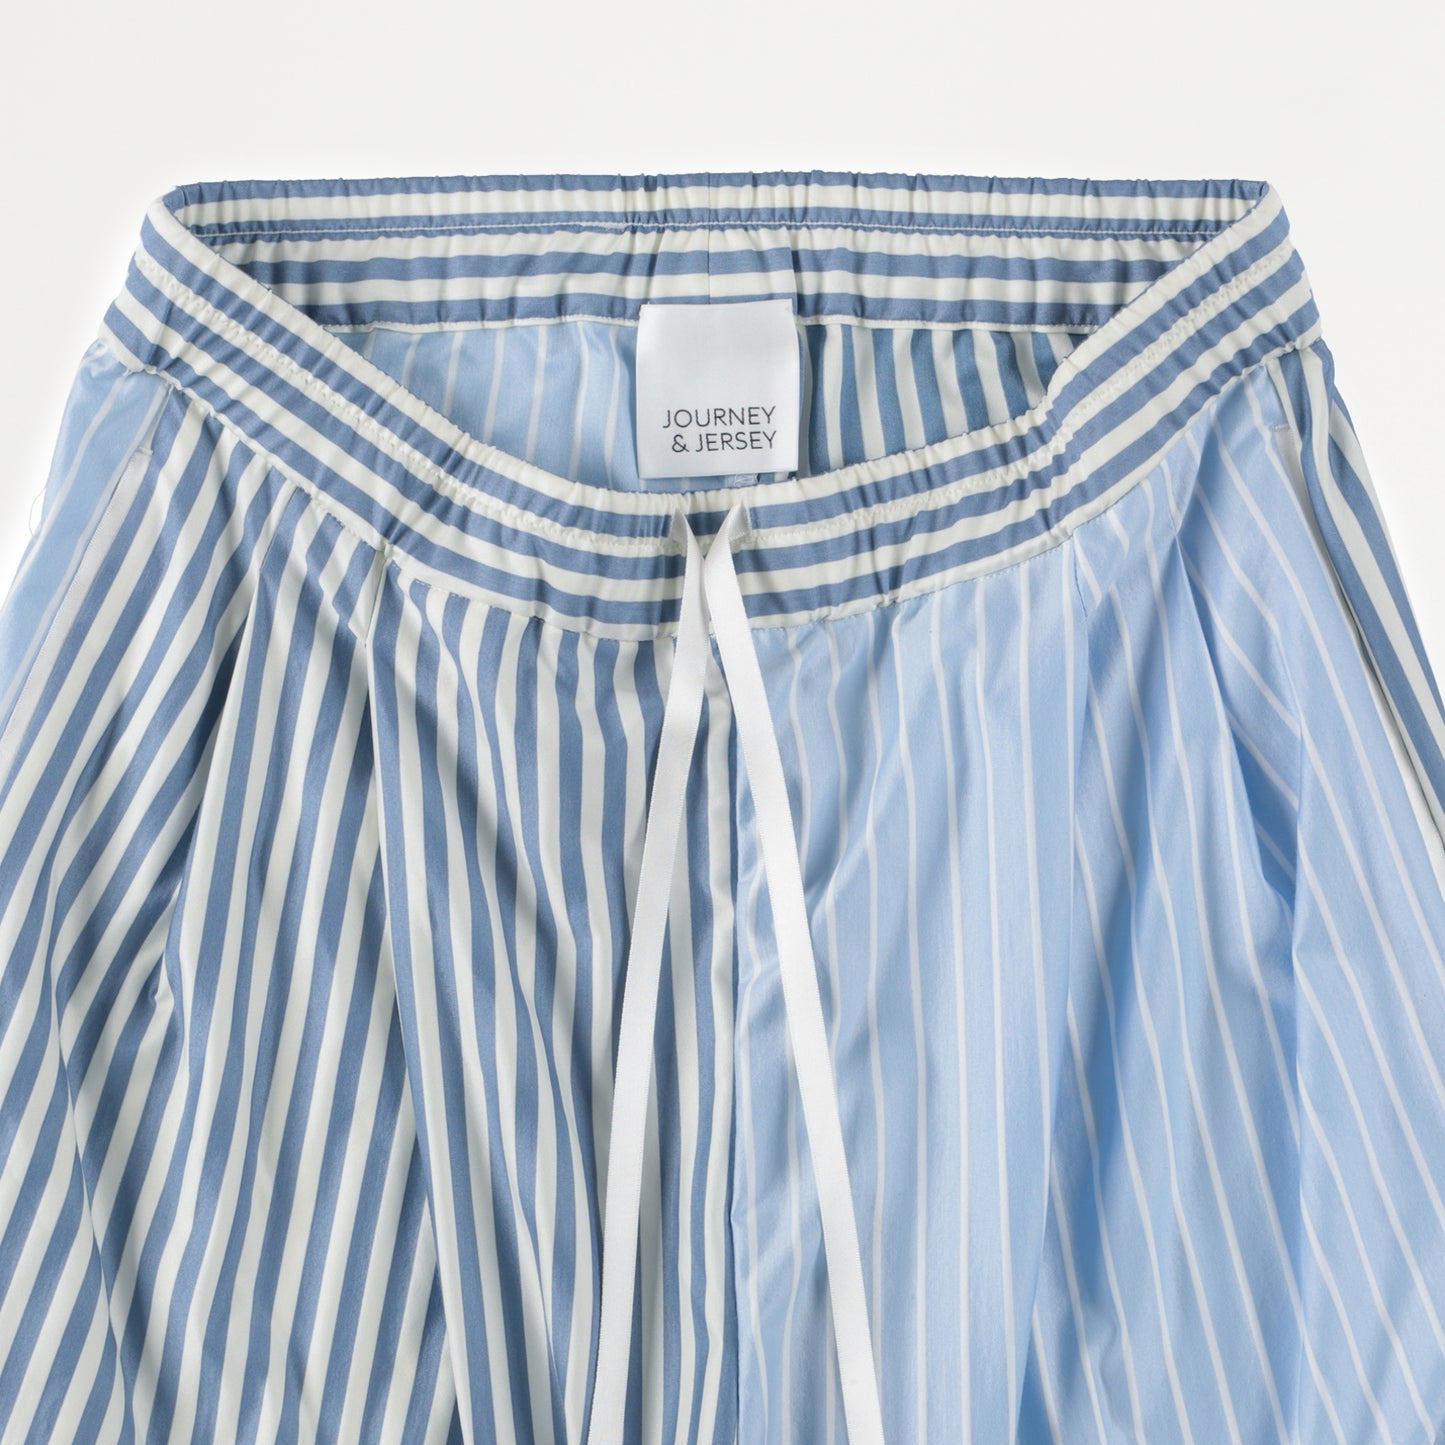 Mix stripe relaxed shorts